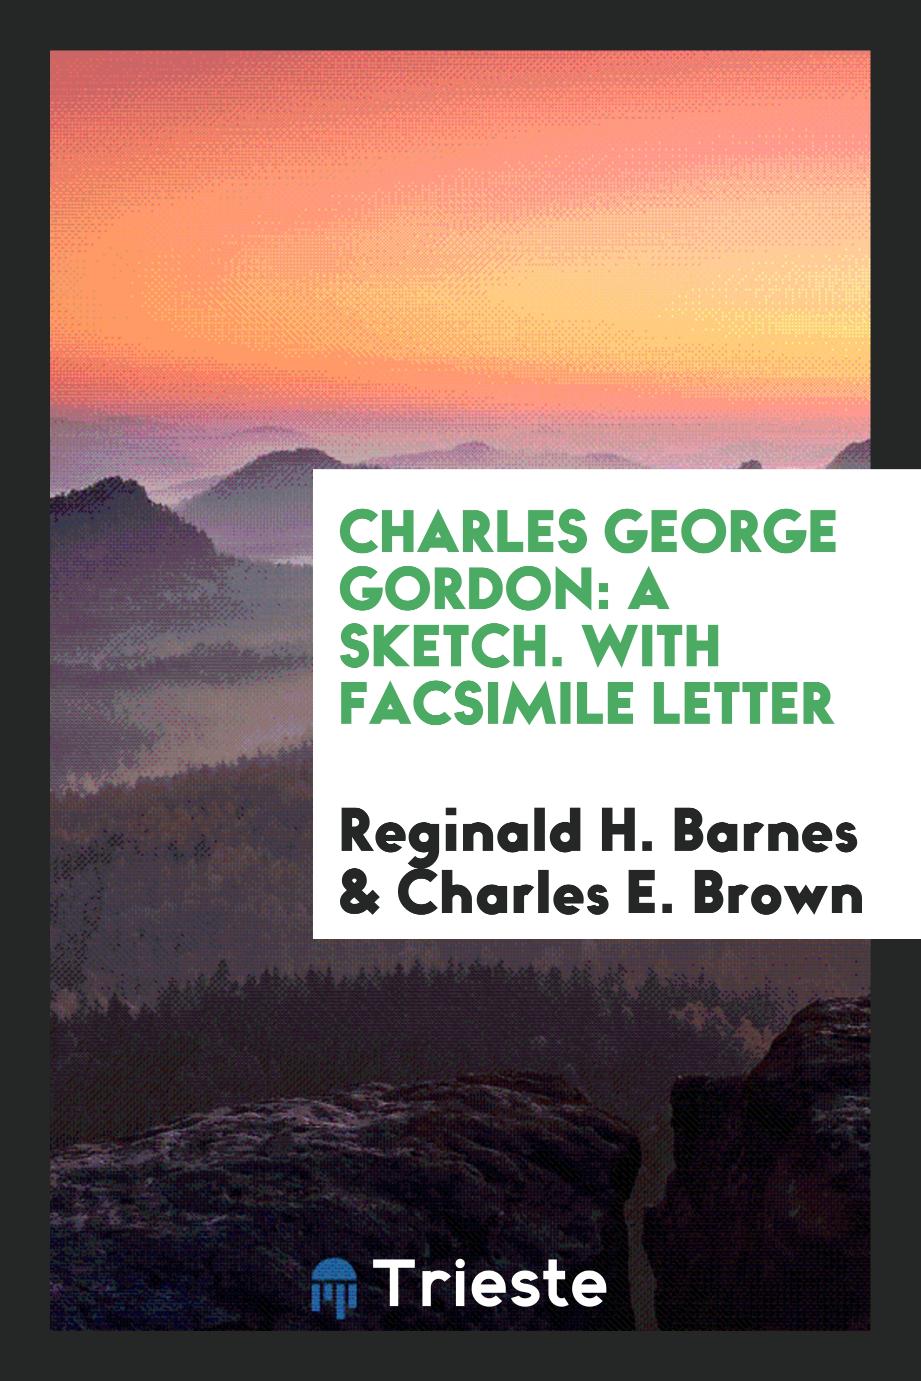 Charles George Gordon: A Sketch. With Facsimile Letter